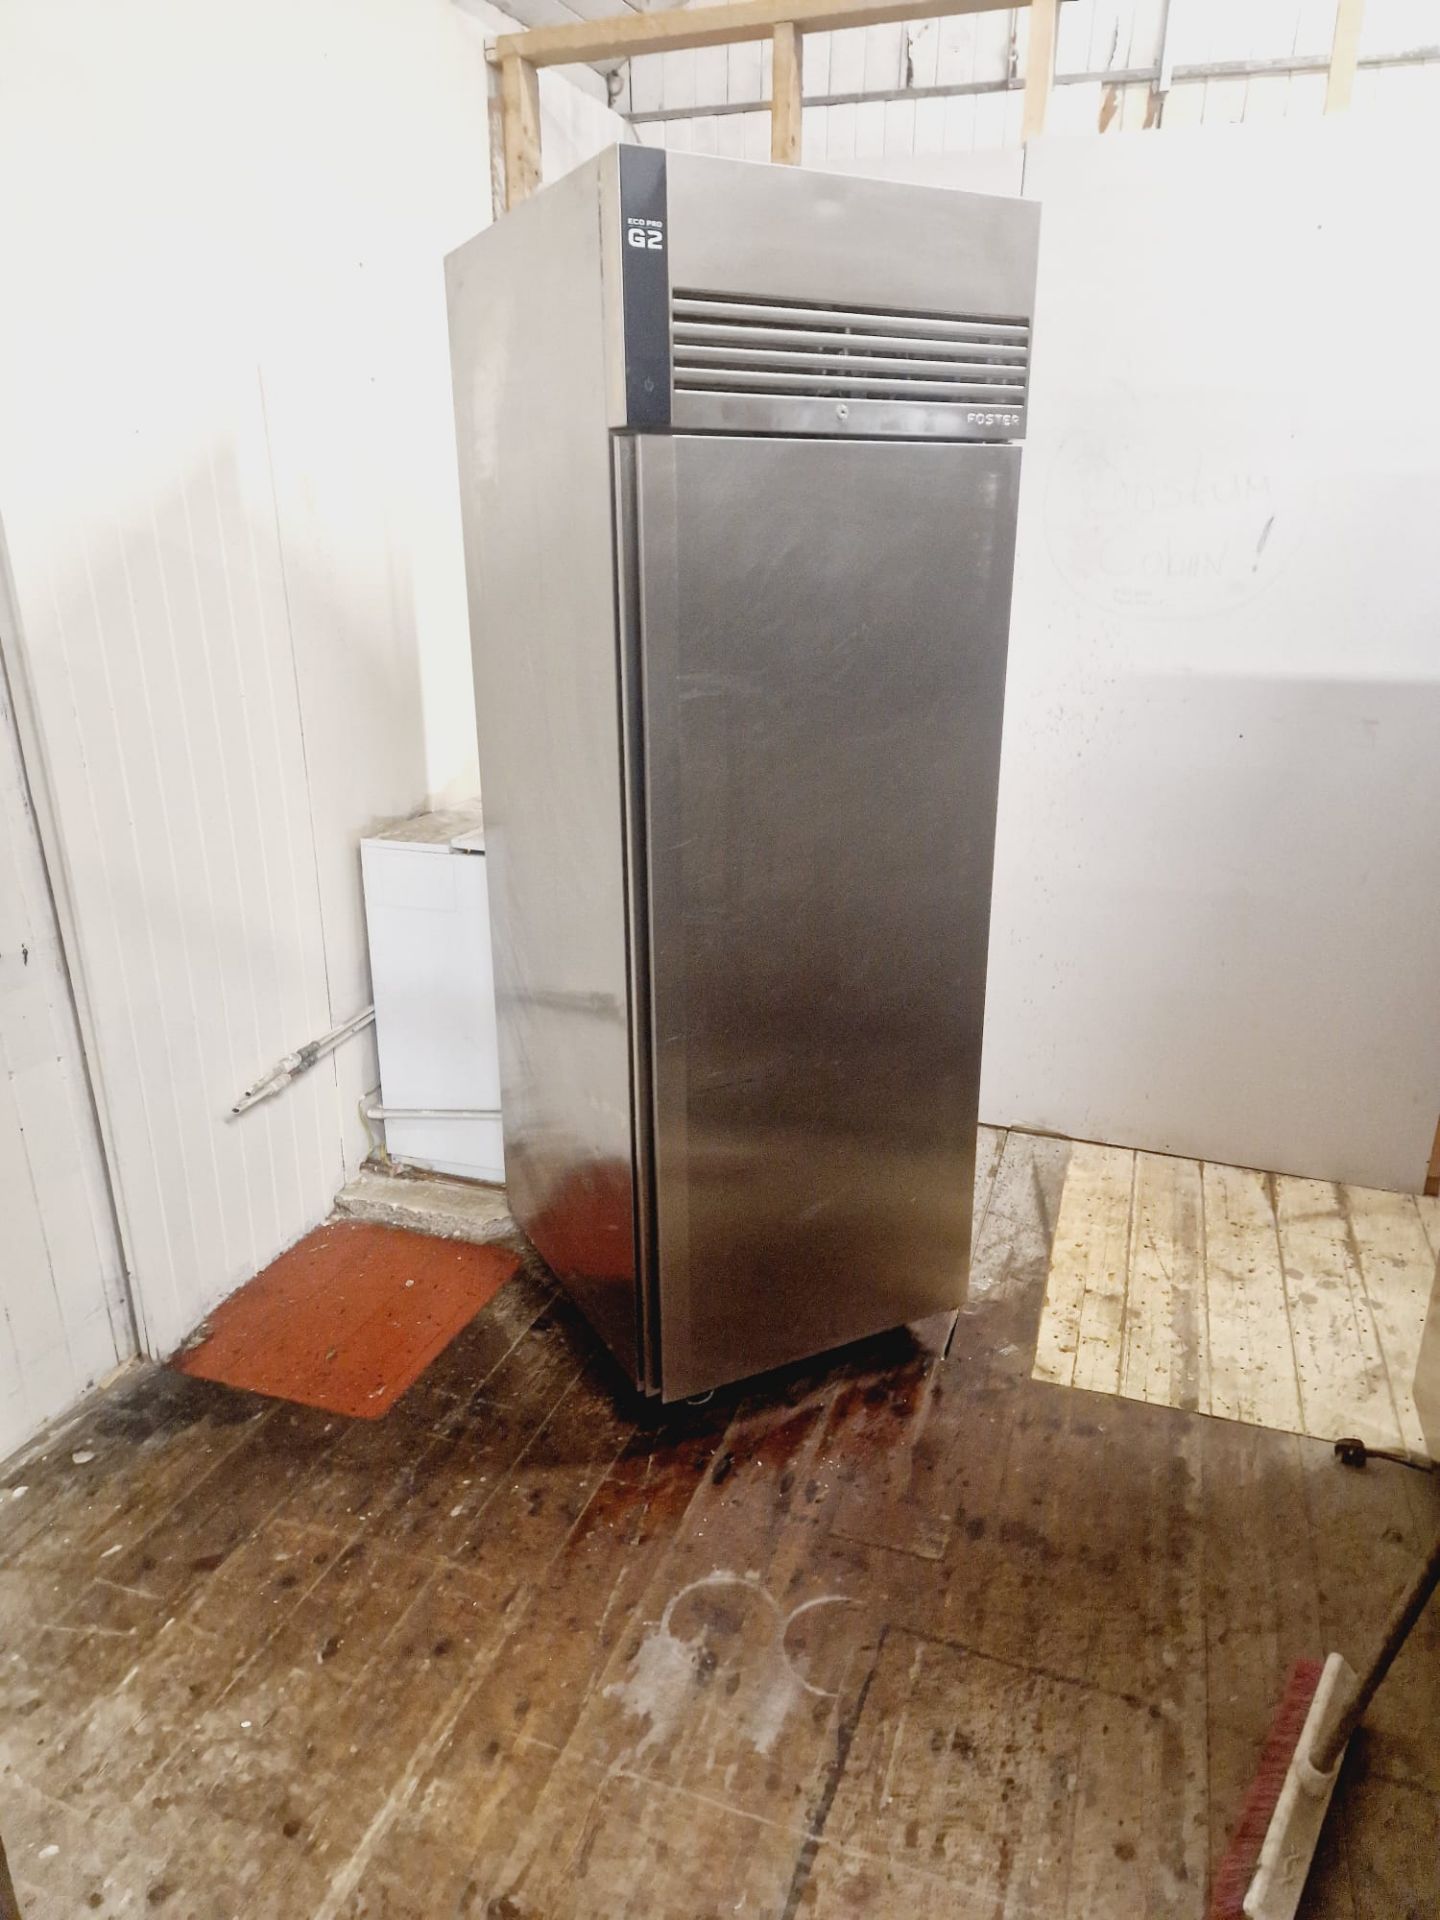 FOSTER G2 UPRIGHT FRIDGE - FULLY SERVICED AND WORKING - Image 3 of 3